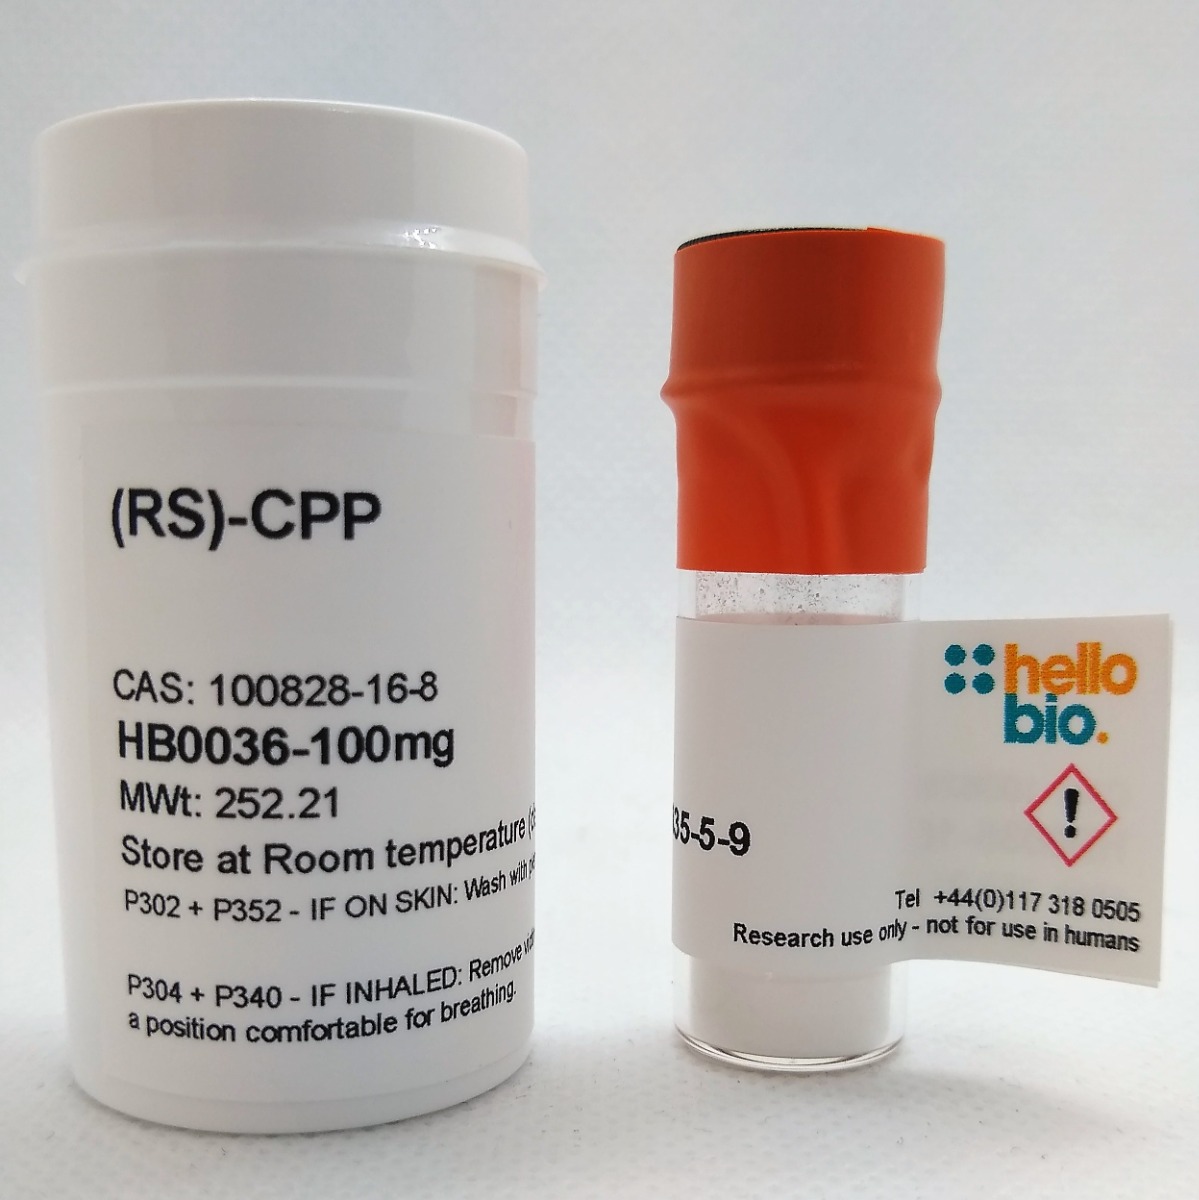 (RS)-CPP product vial image | Hello Bio